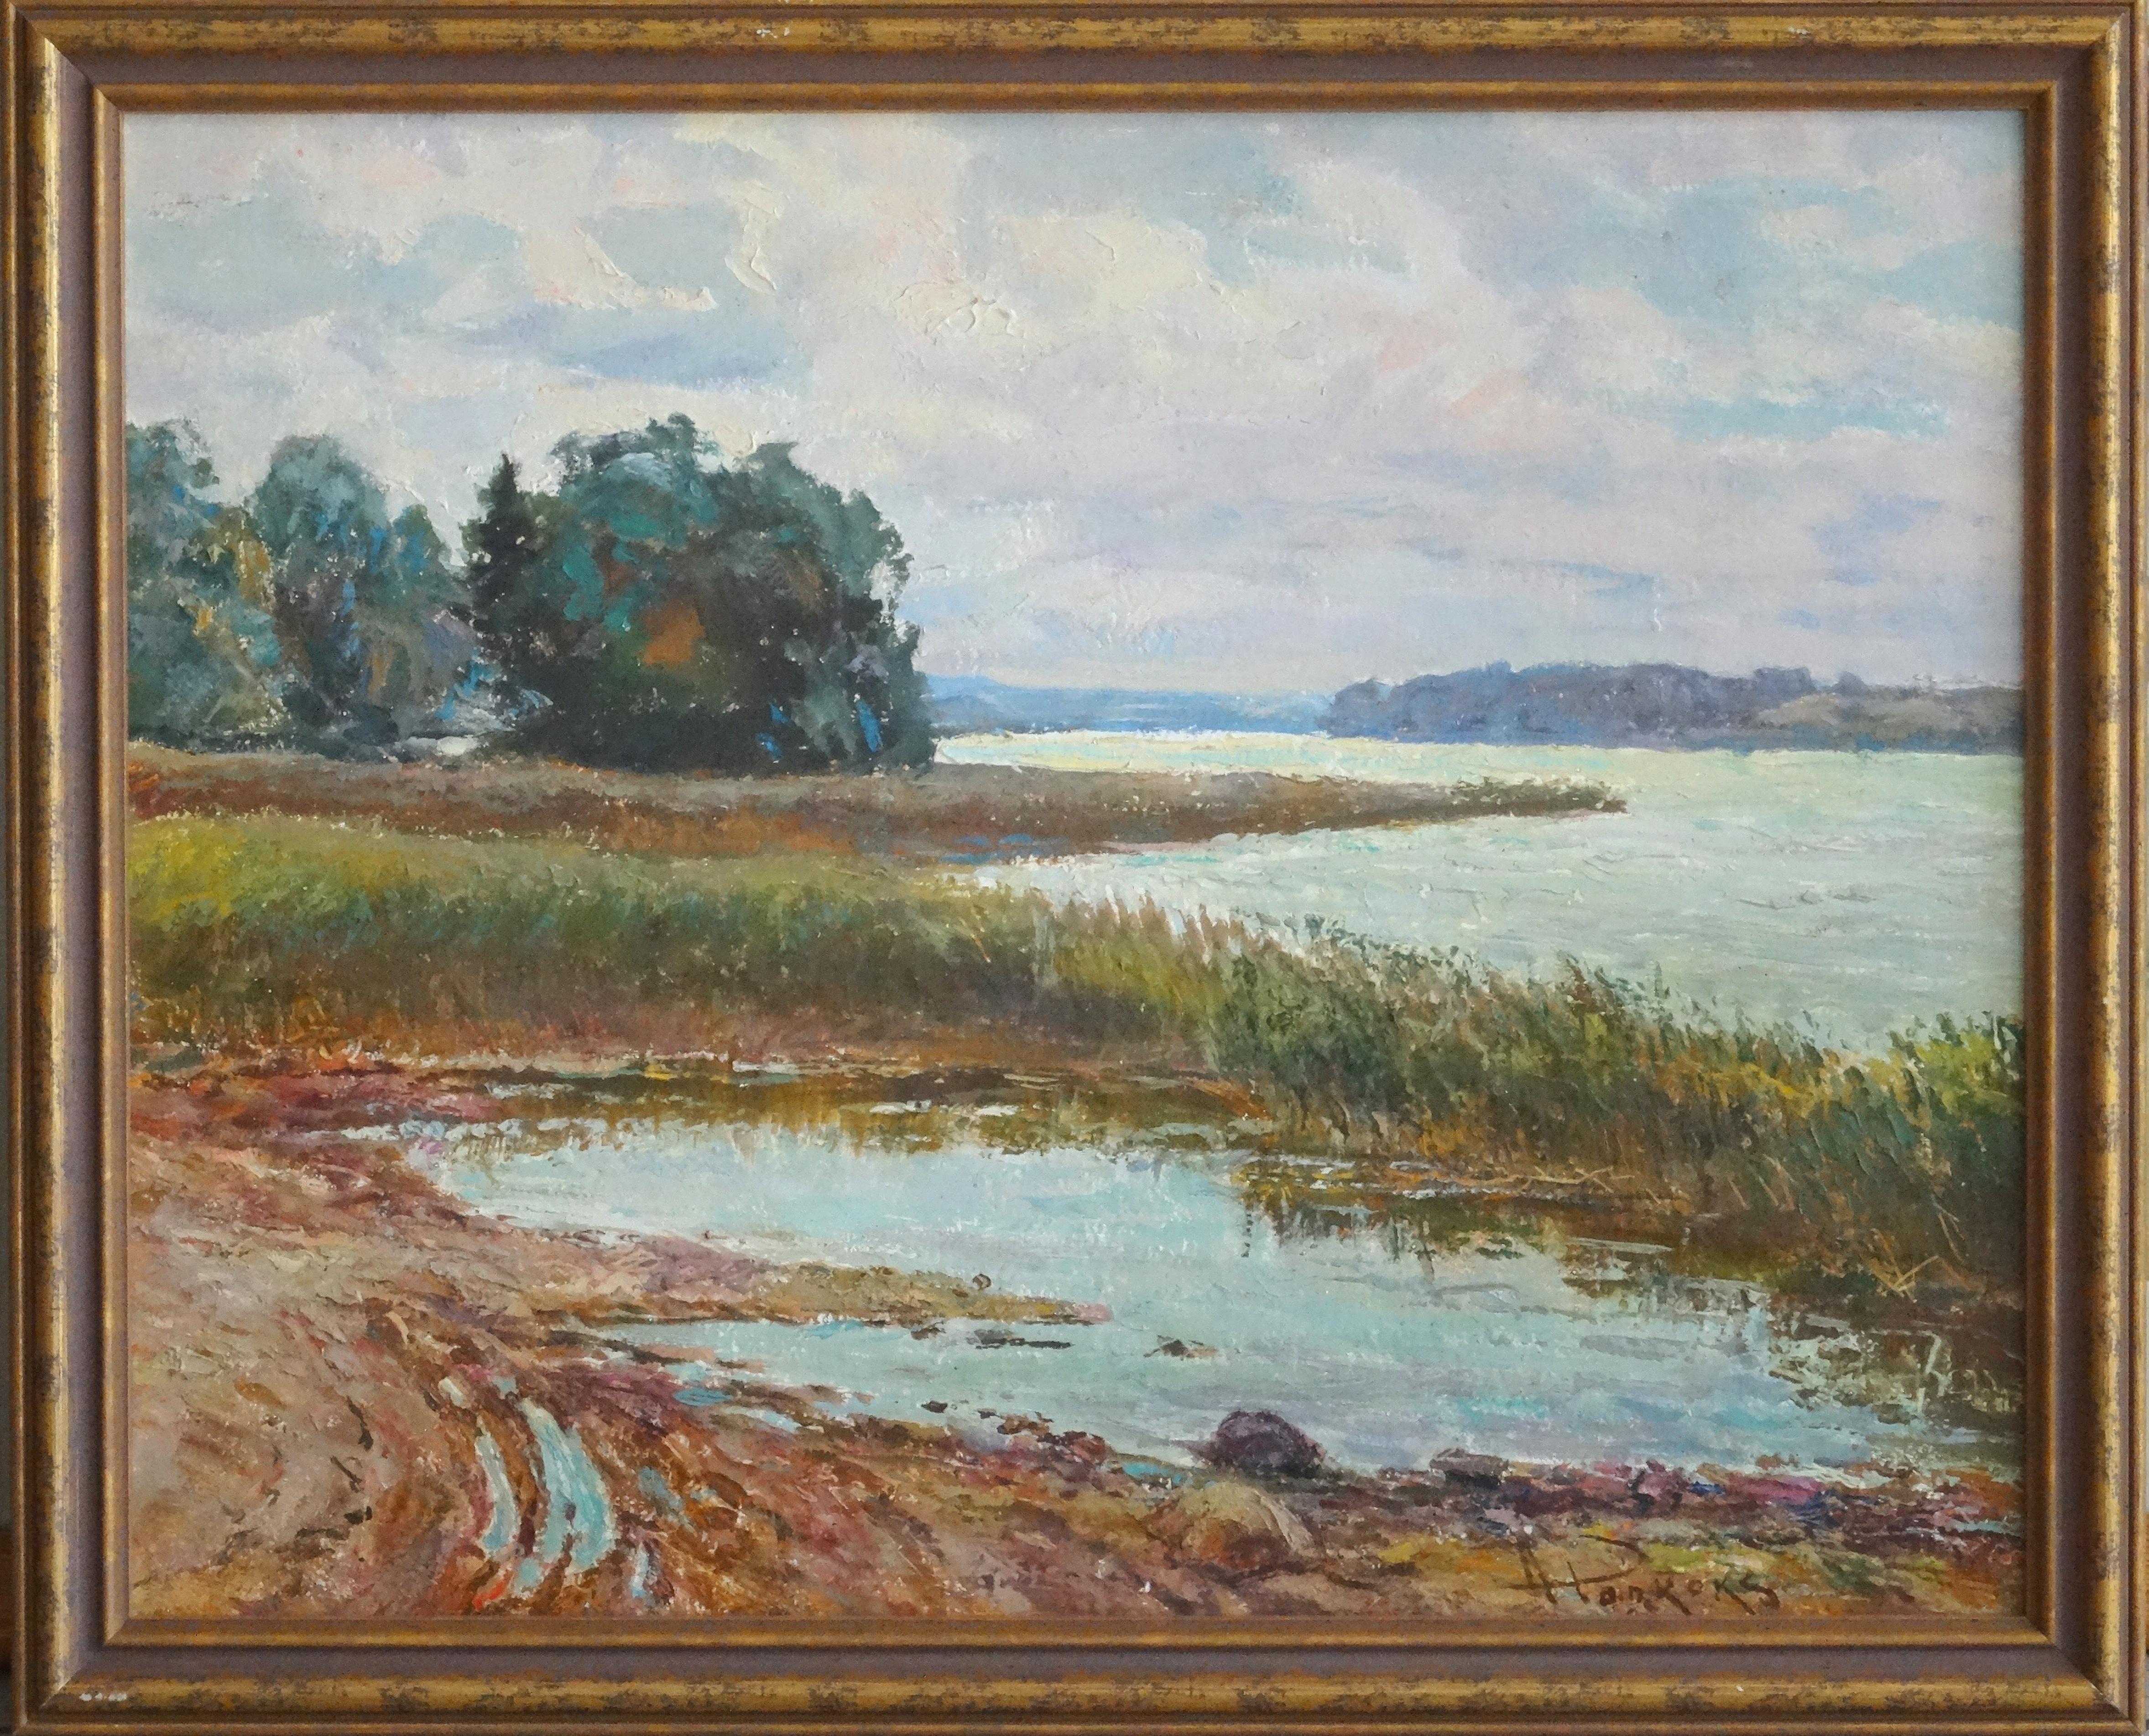 By the lake. Oil on cardboard, 40x50 cm - Painting by Arnolds Pankoks